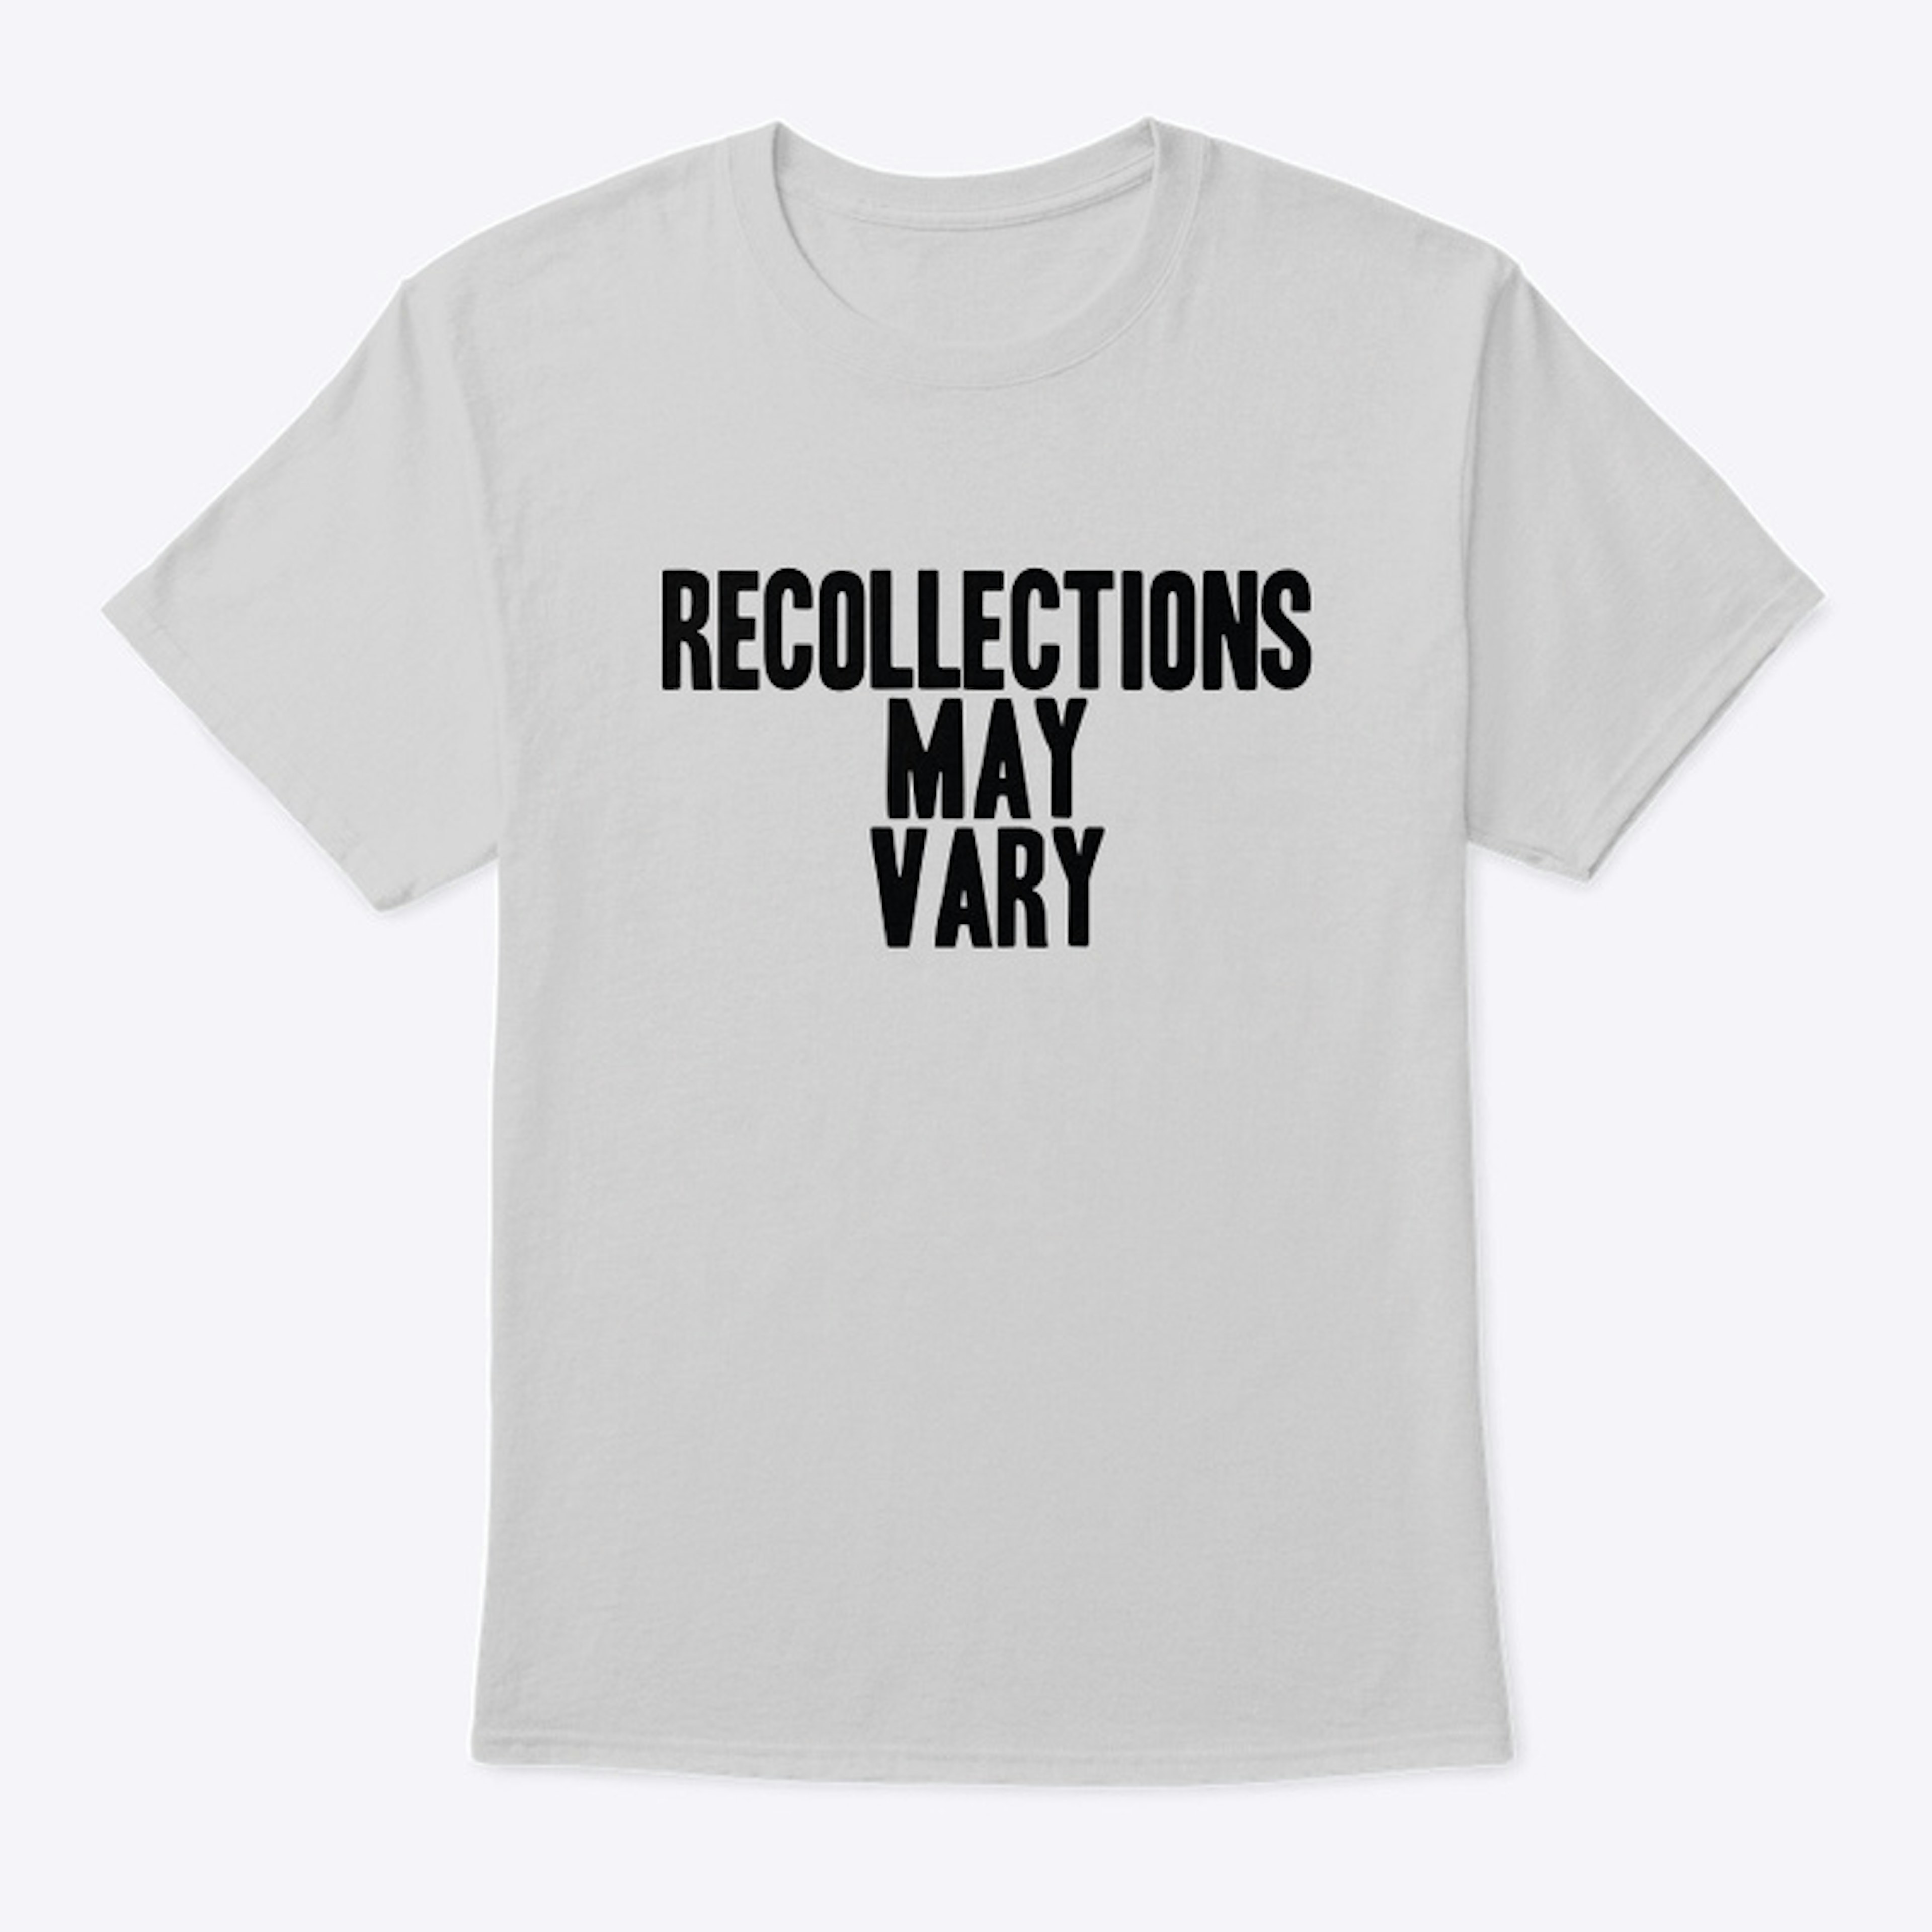 NEW Recollections May Vary Headline Tee